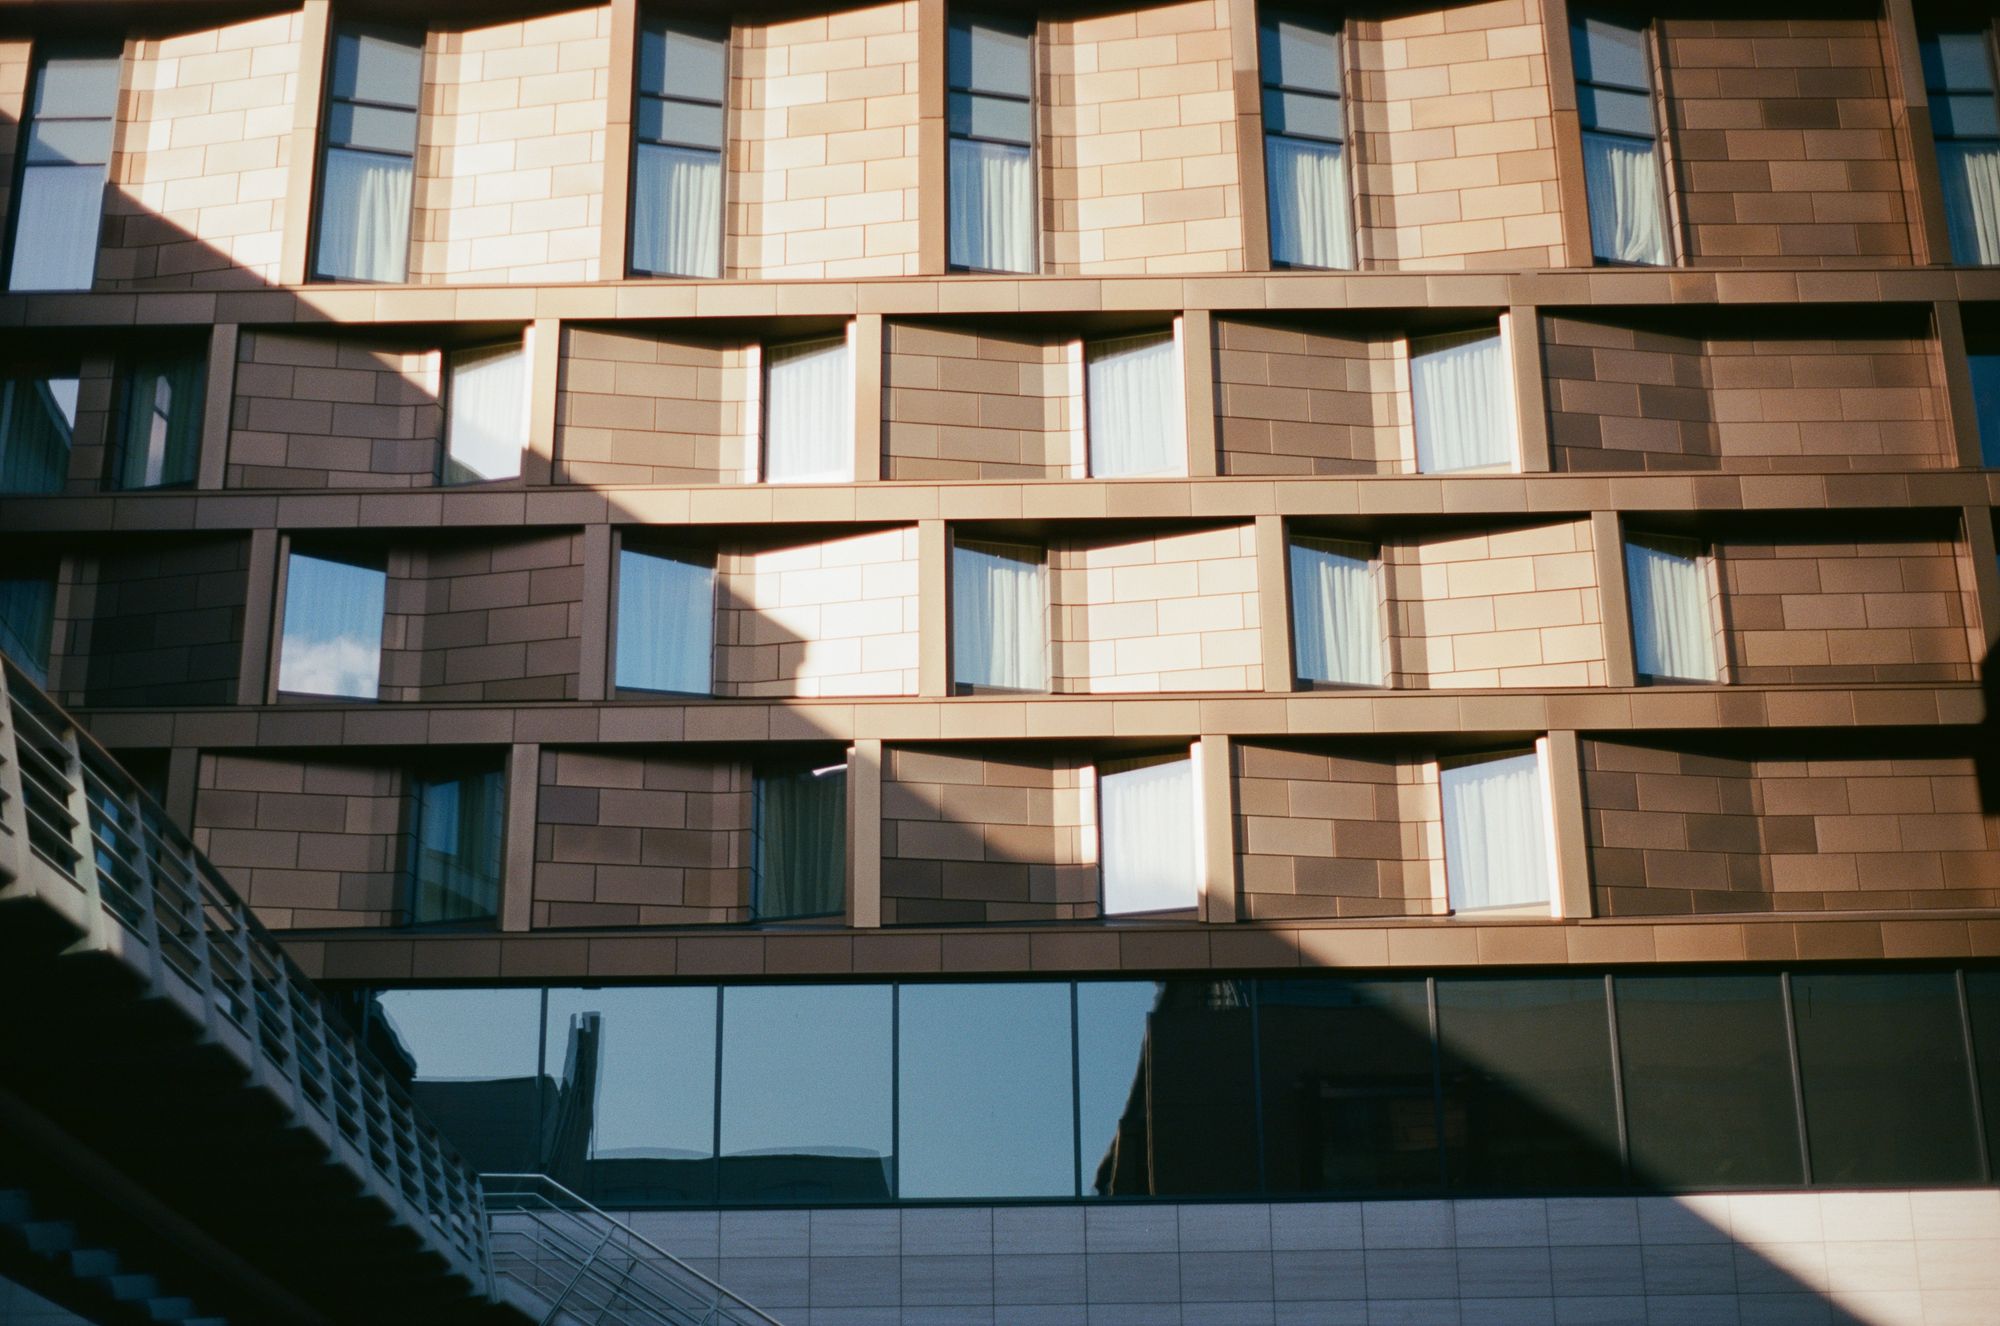 A wall of crenellated hotel rooms with brownish shiny metallic cladding, with a sharp shadow cast across it. A Medway runs off to the left.